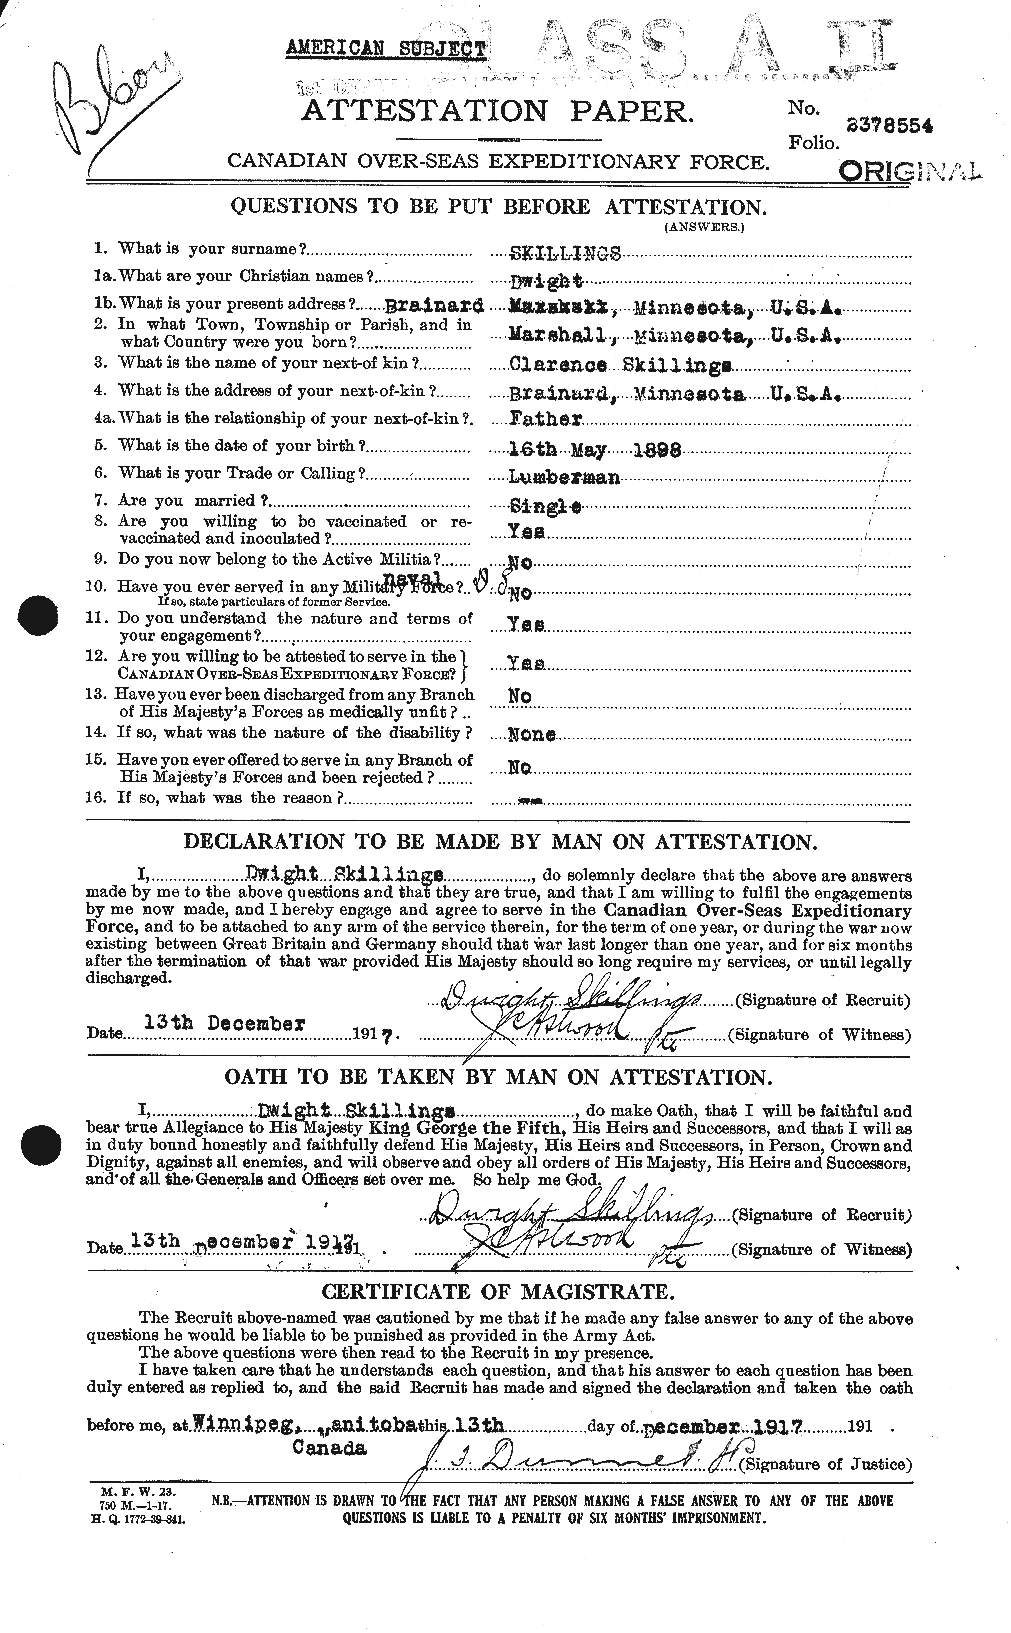 Personnel Records of the First World War - CEF 098985a